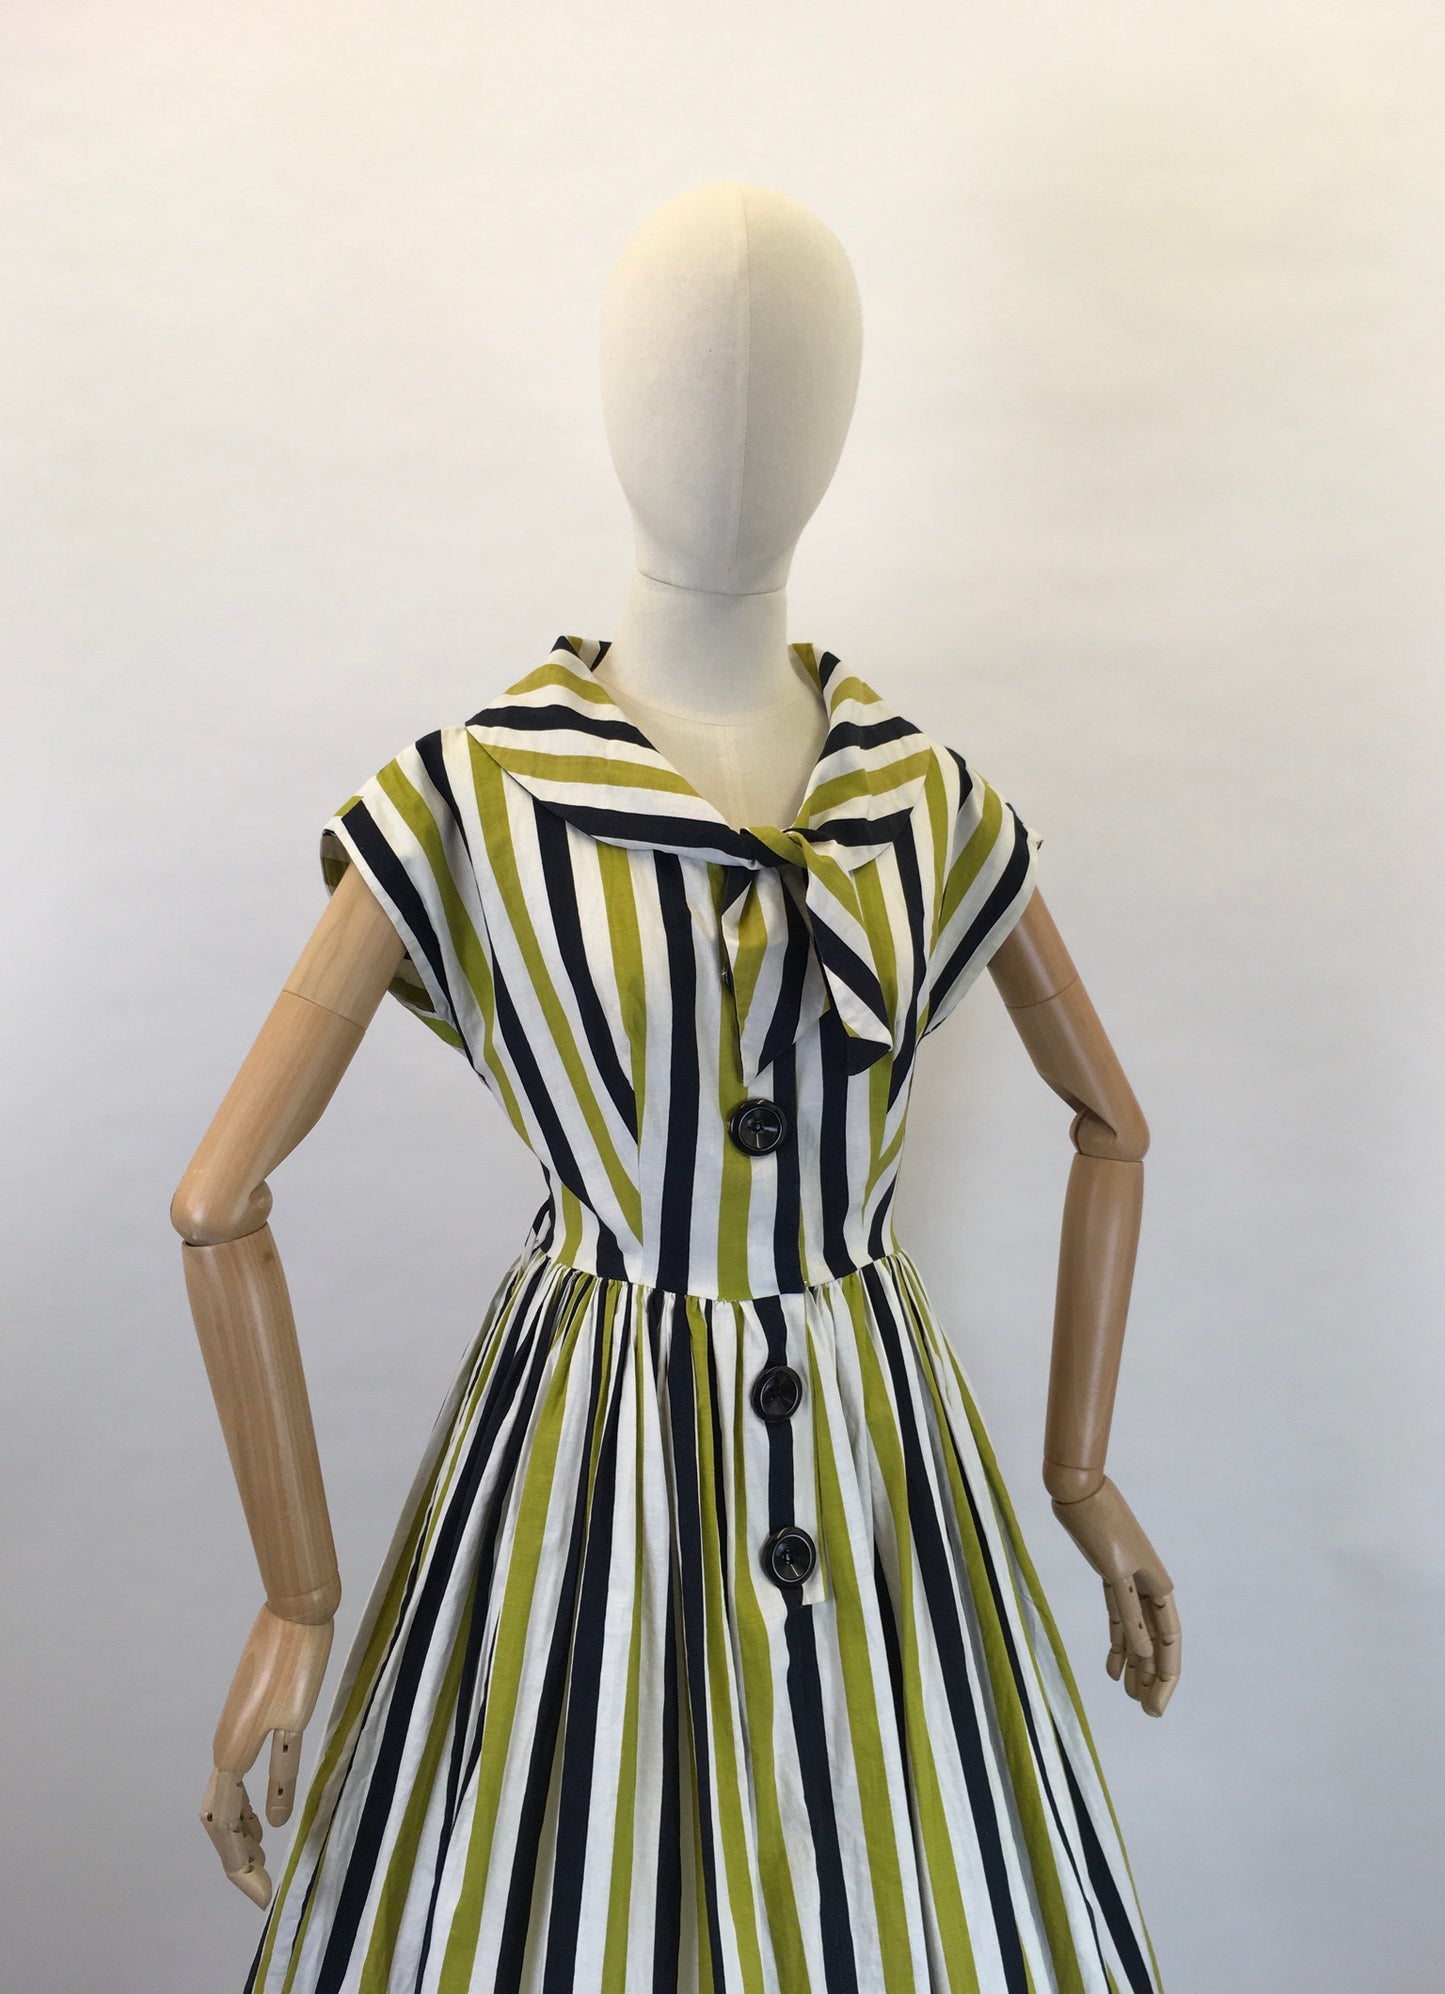 Original 1950s Fun Day Dress - Made From a Lovely Black, White and Chartreuse Stripe Cotton